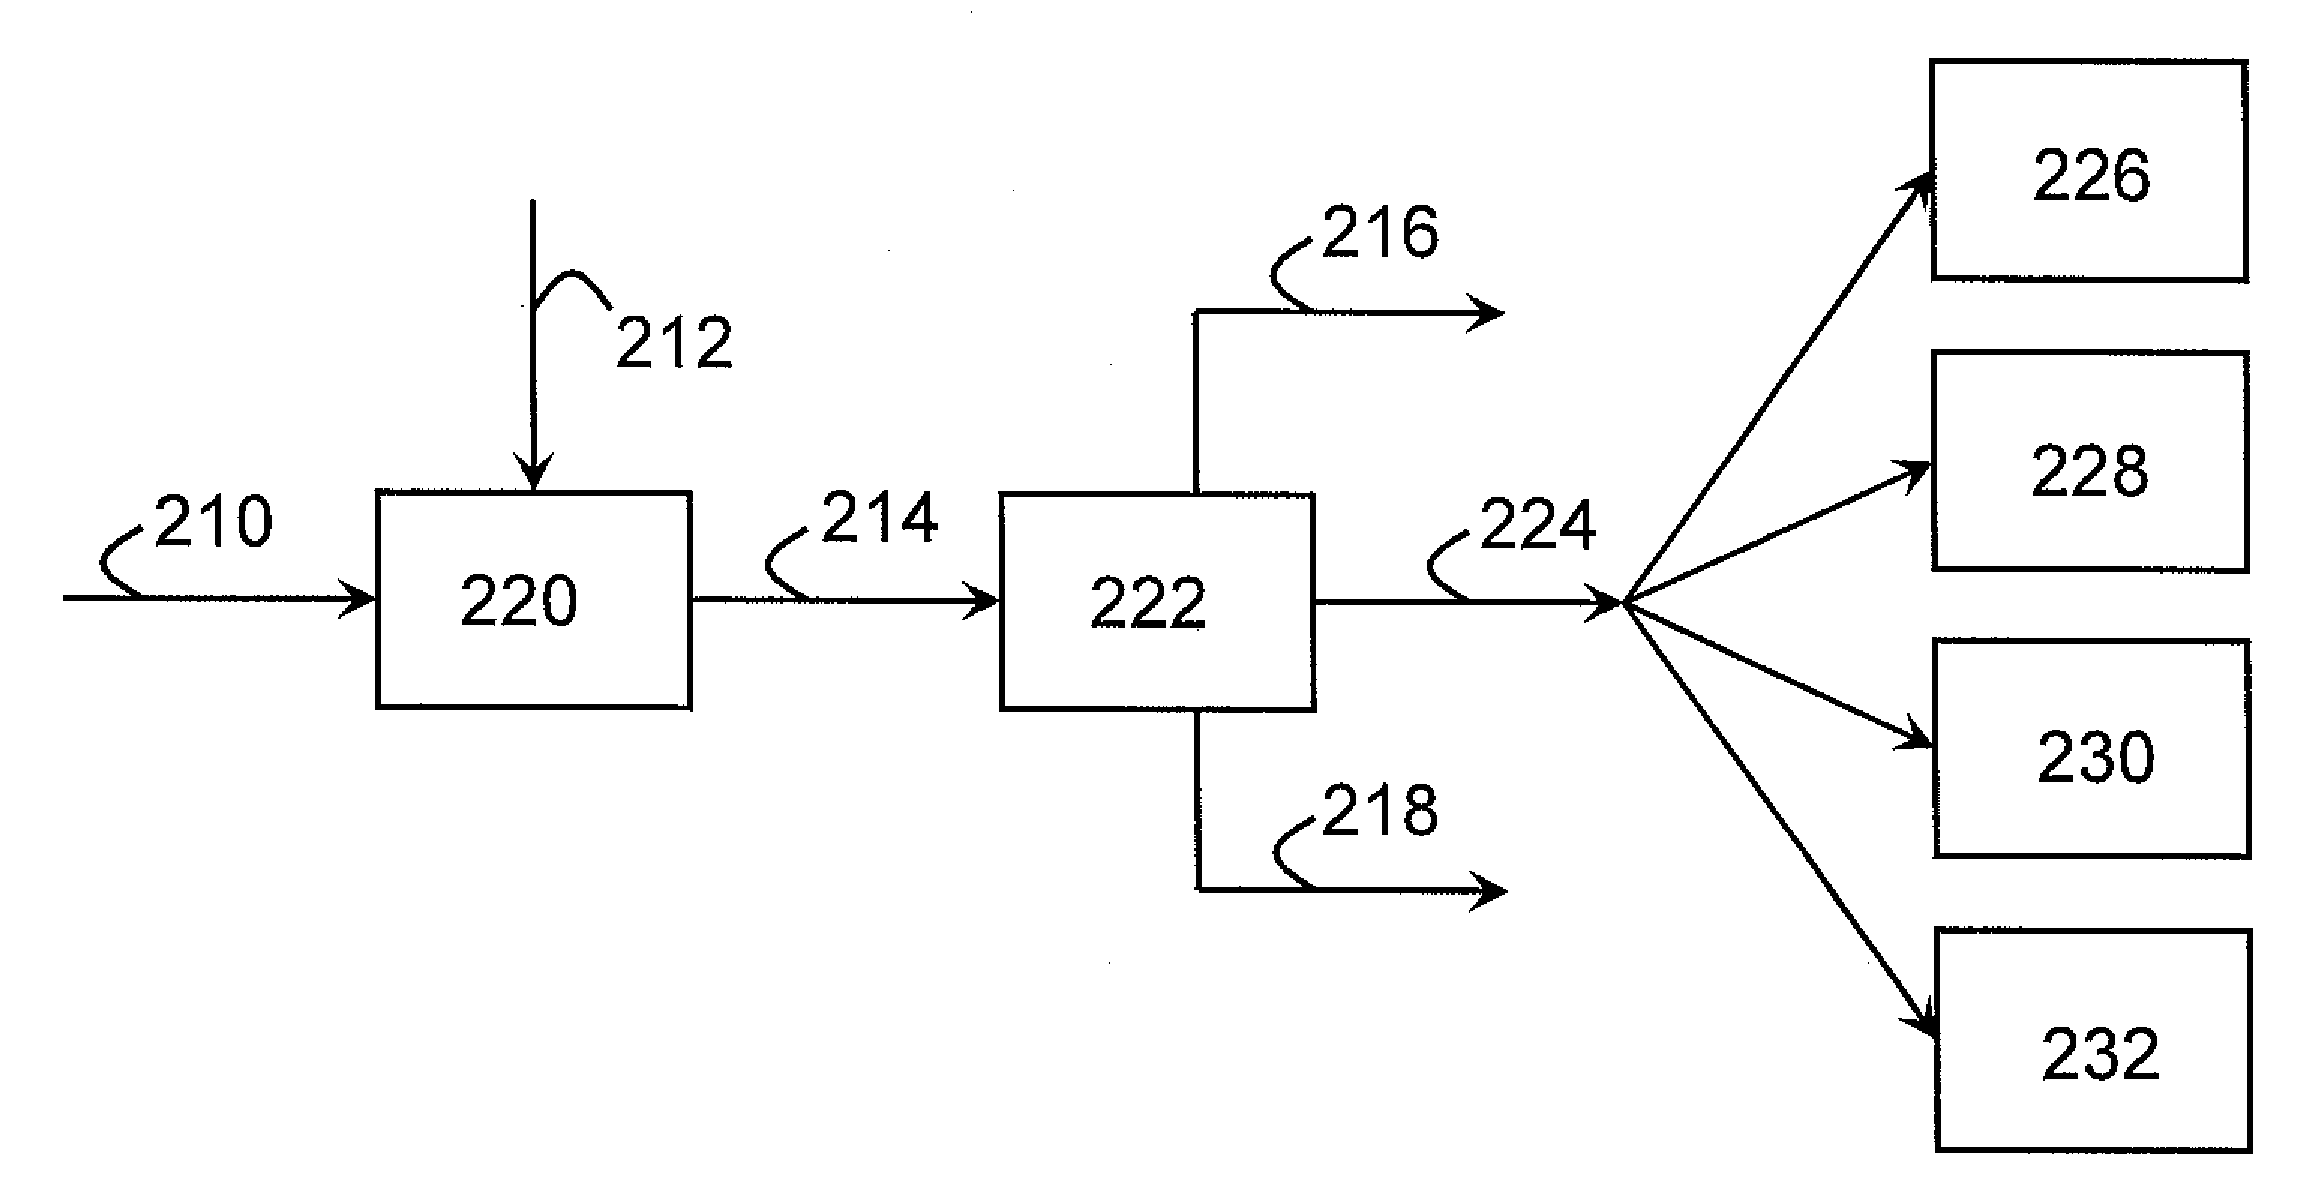 Devices And Processes For Deasphalting And/Or Reducing Metals In A Crude Oil With A Desalter Unit